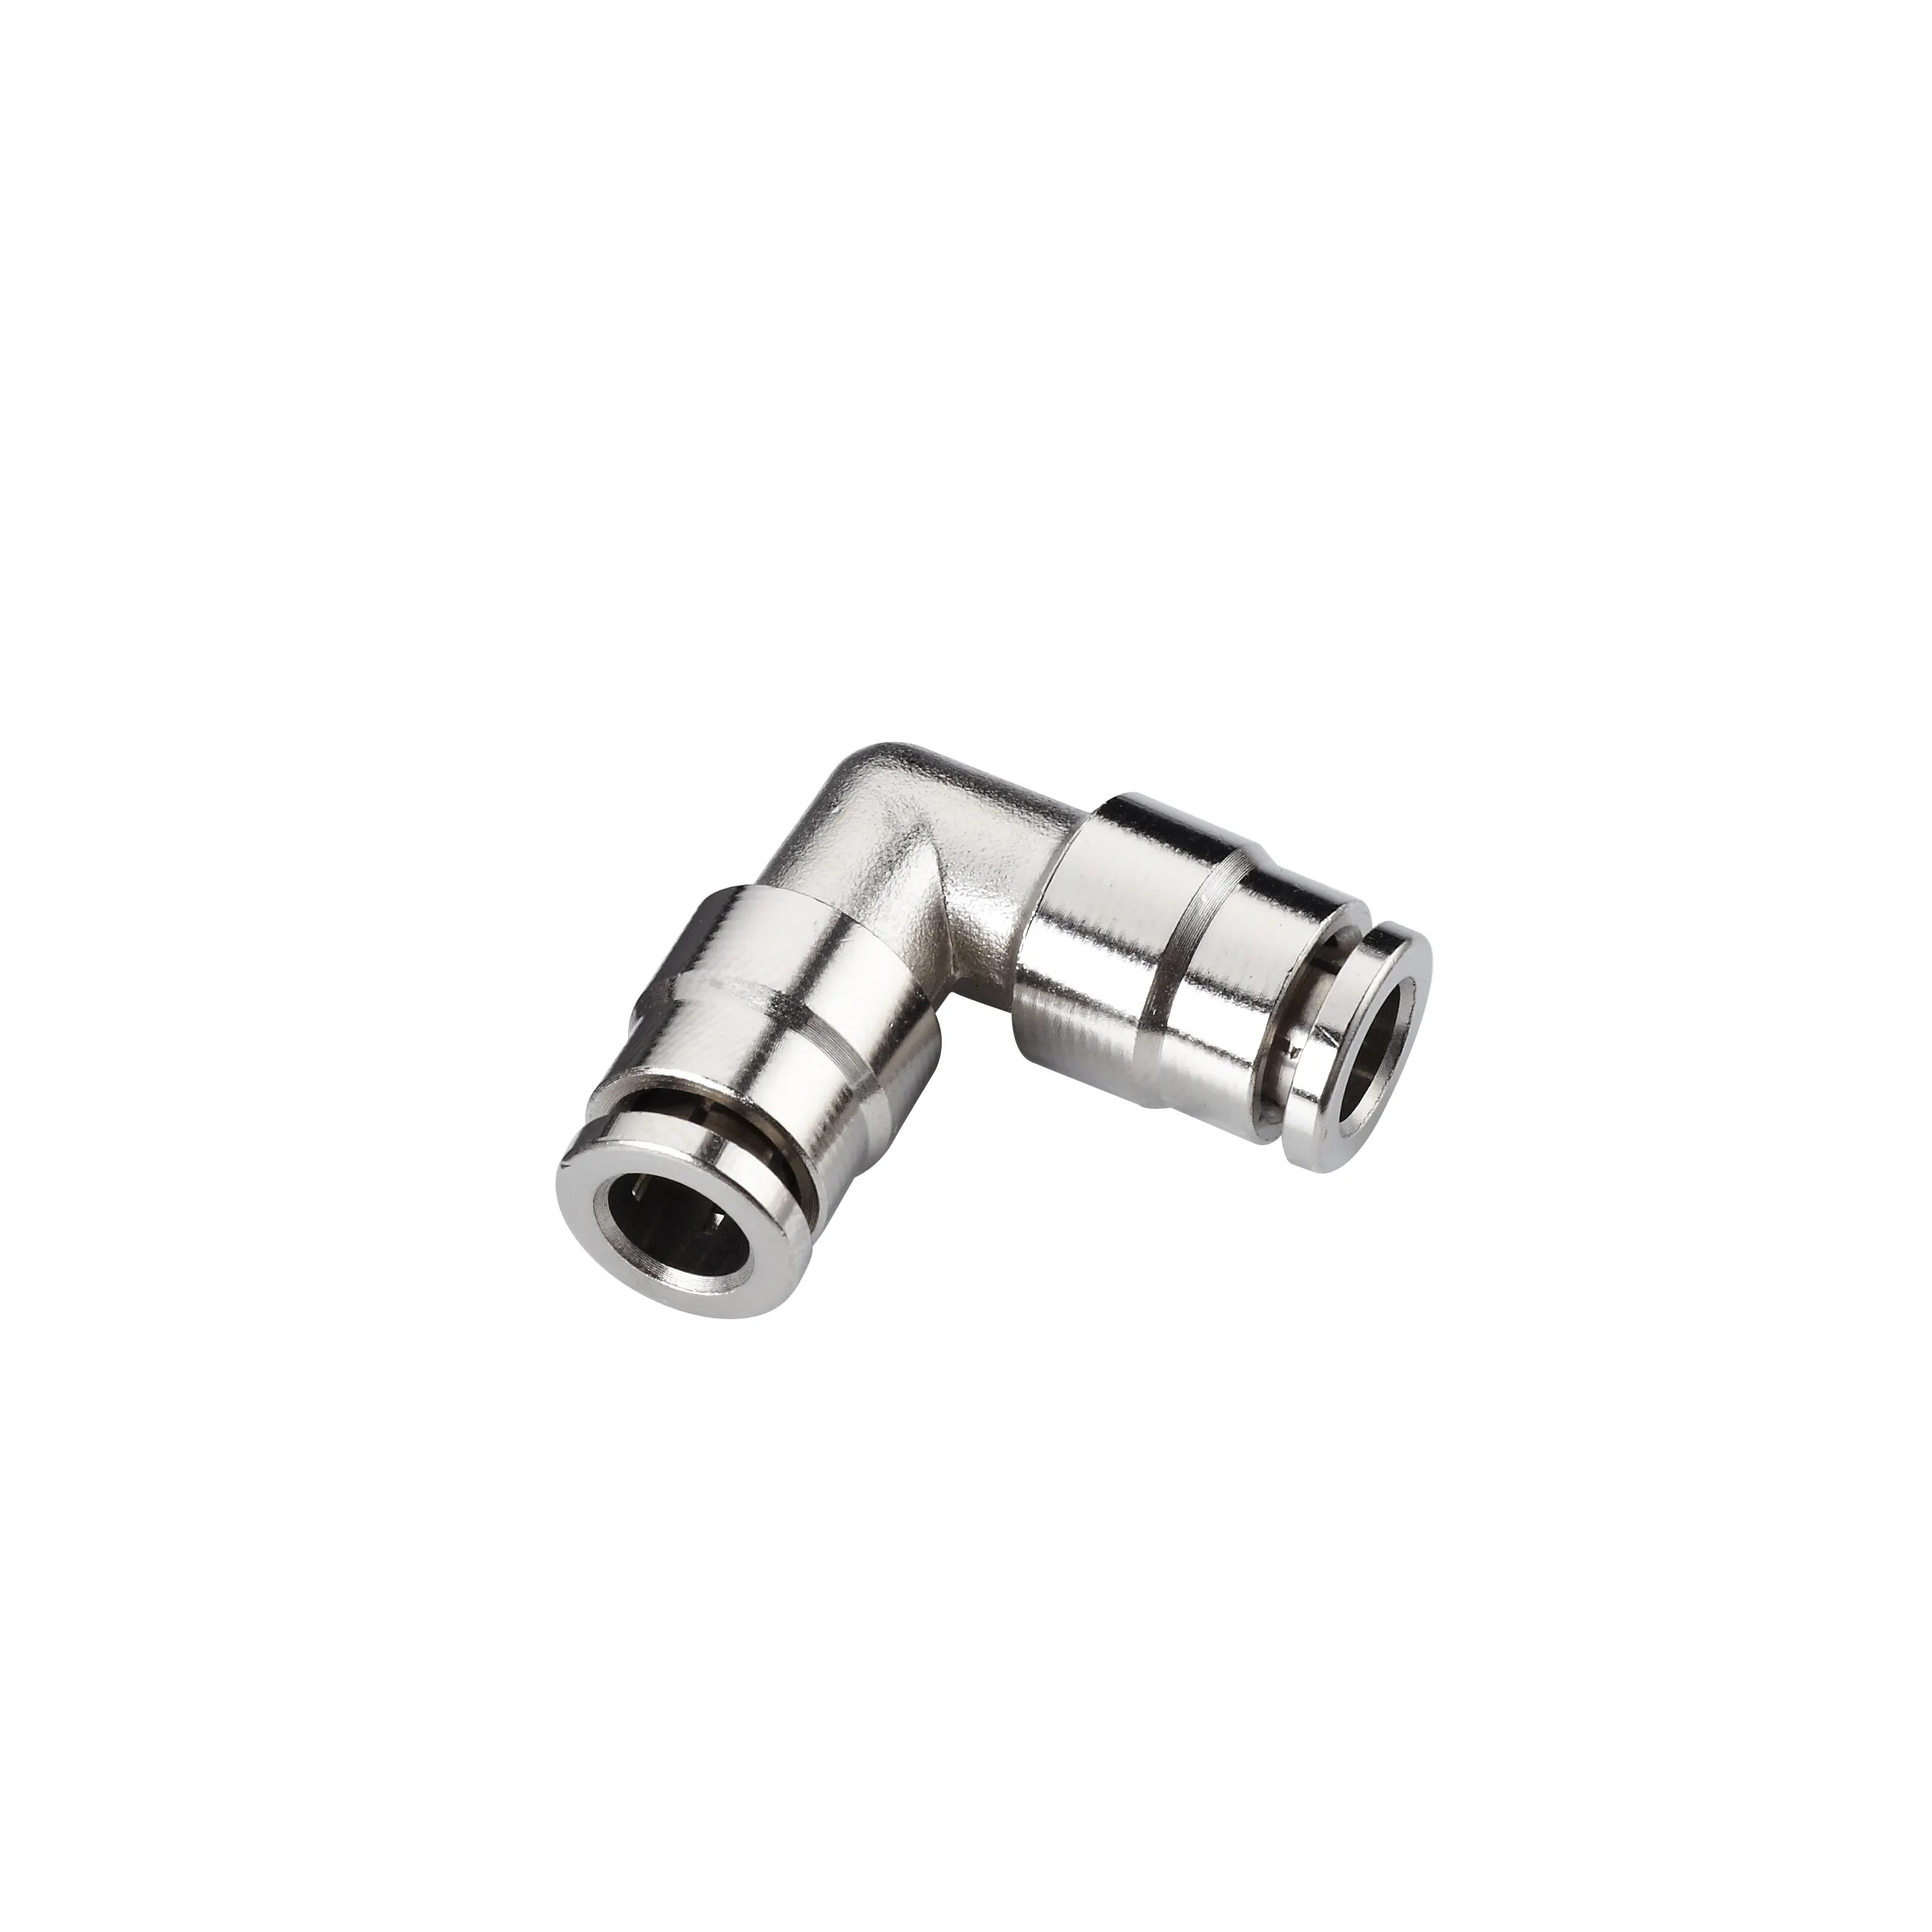 Union Elbow Male Brass Fitting PL 90 Degree Elbow Push in 1/2" 1/4" Air Hose Connector Pneumatic Fitting